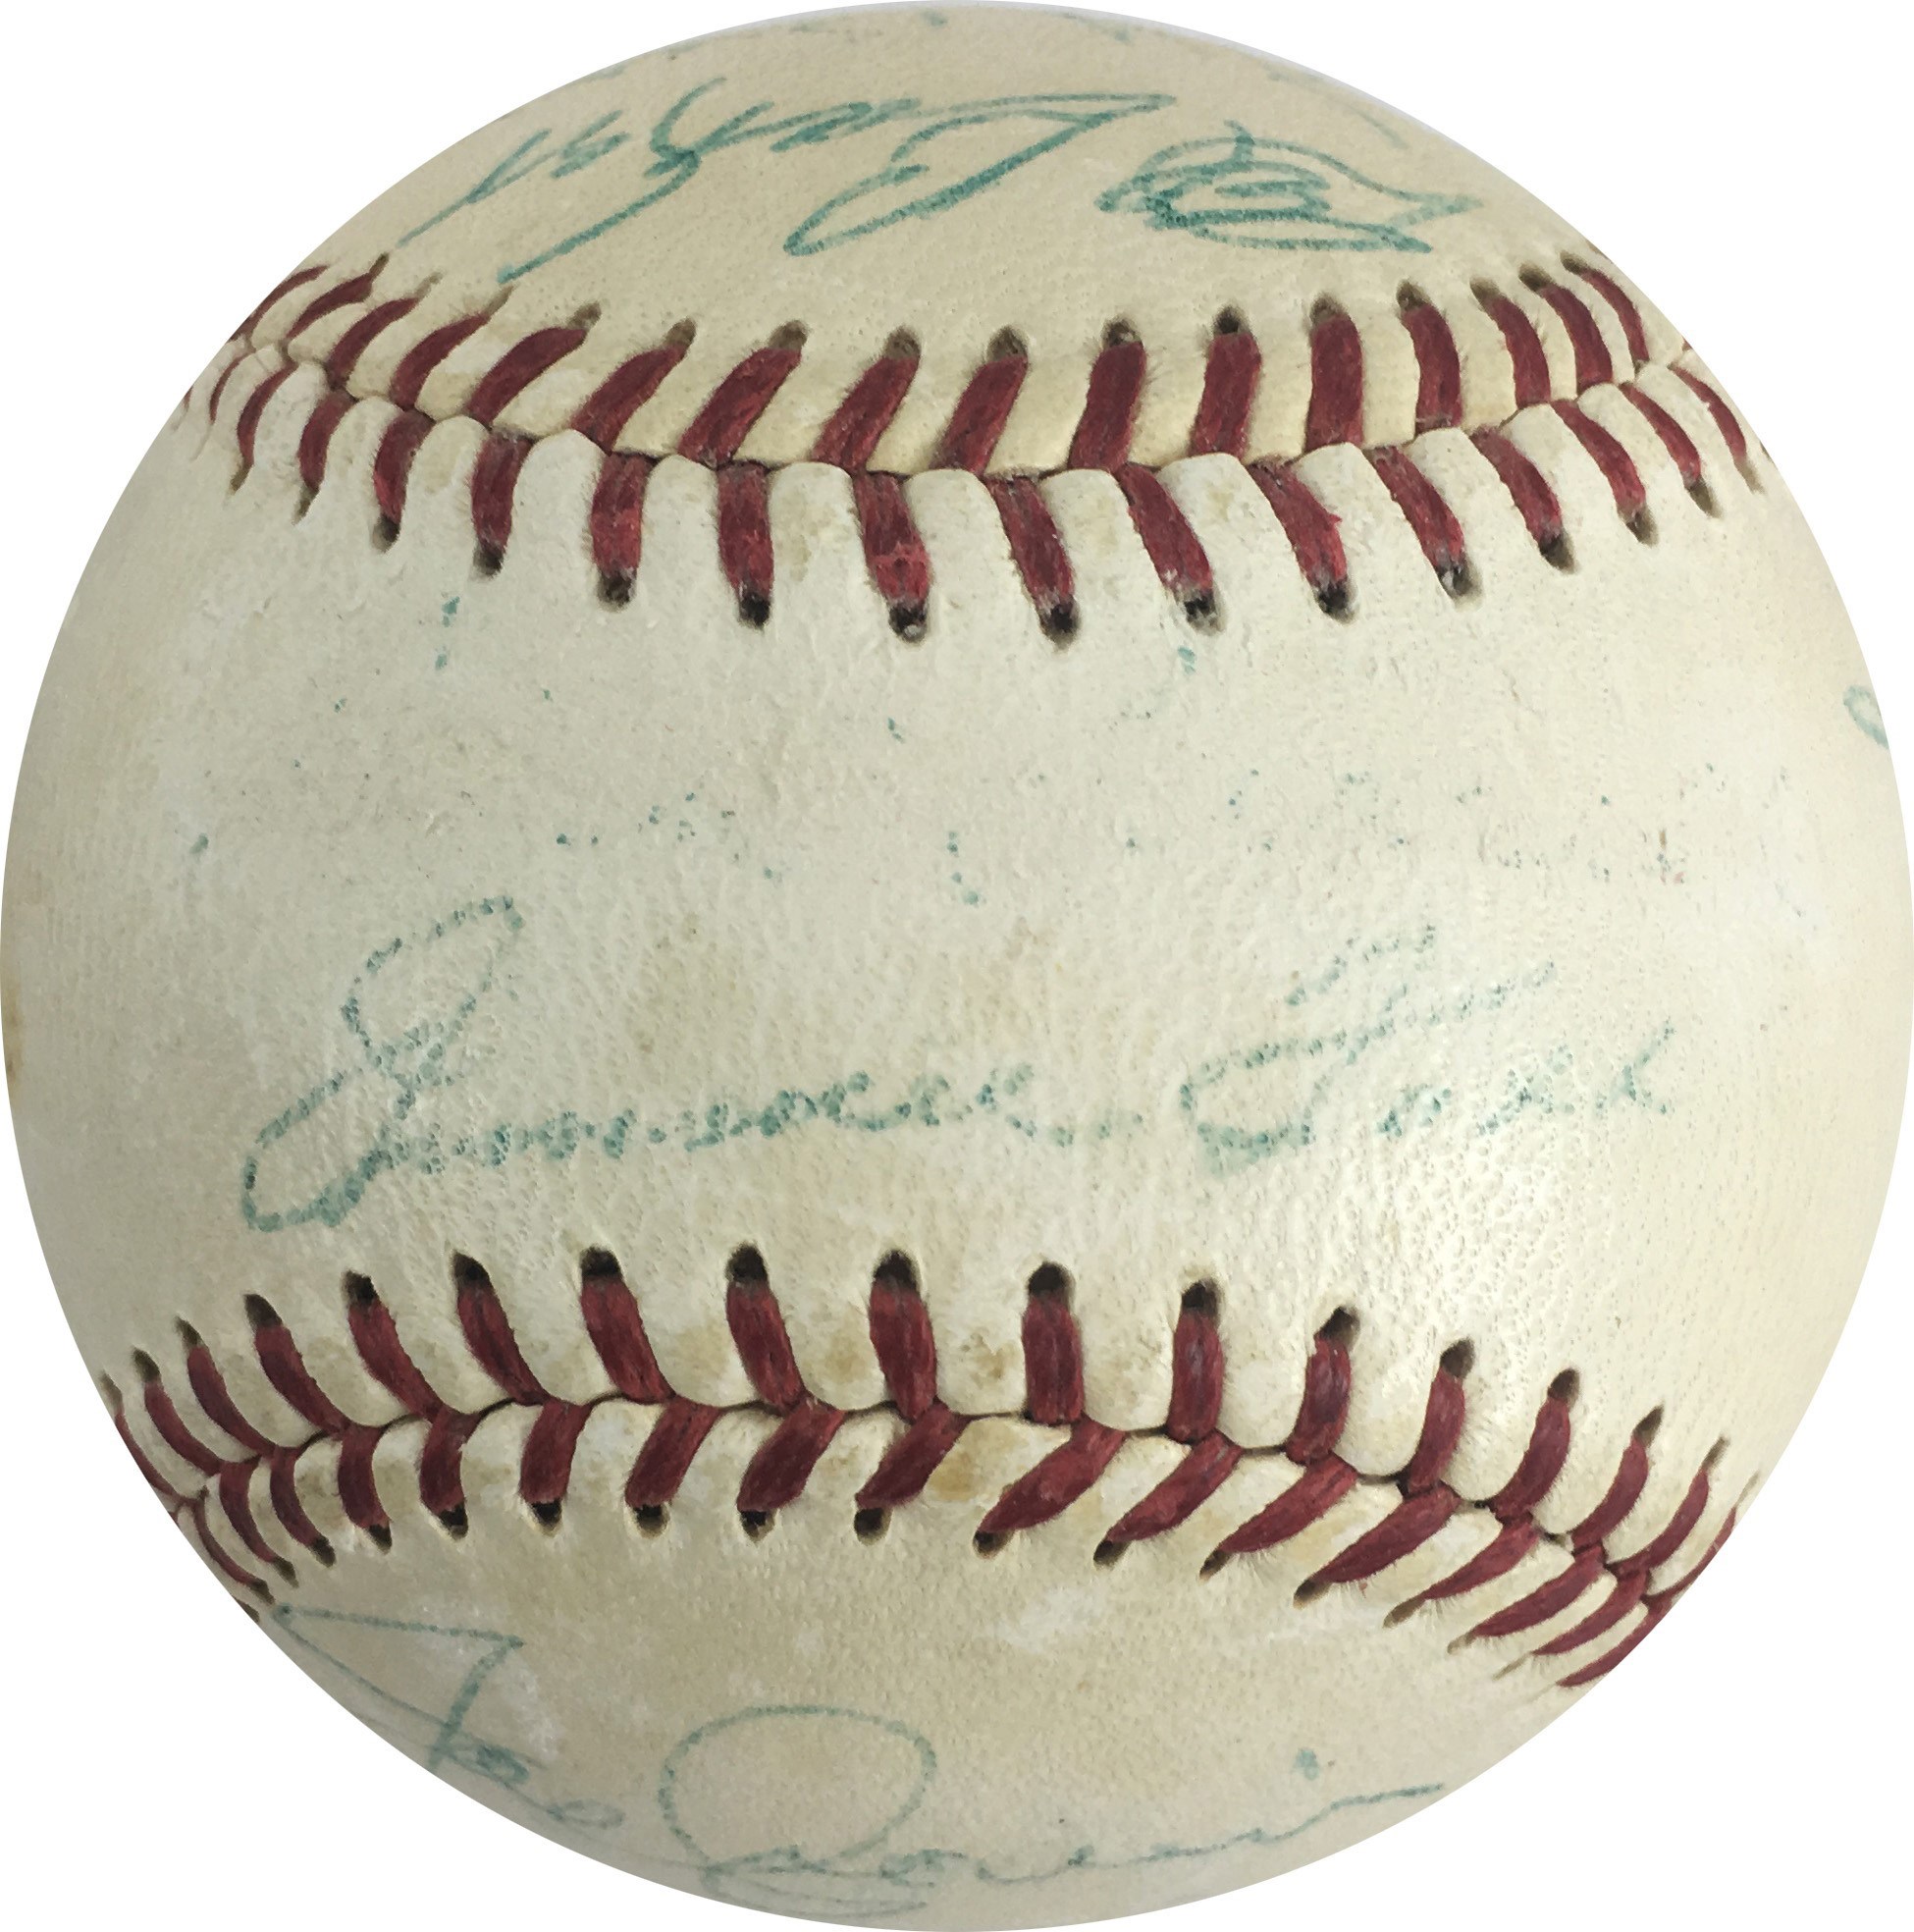 Baseball Autographs - Boston Red Sox Old Timers Signed Baseball w/Jimmie Foxx